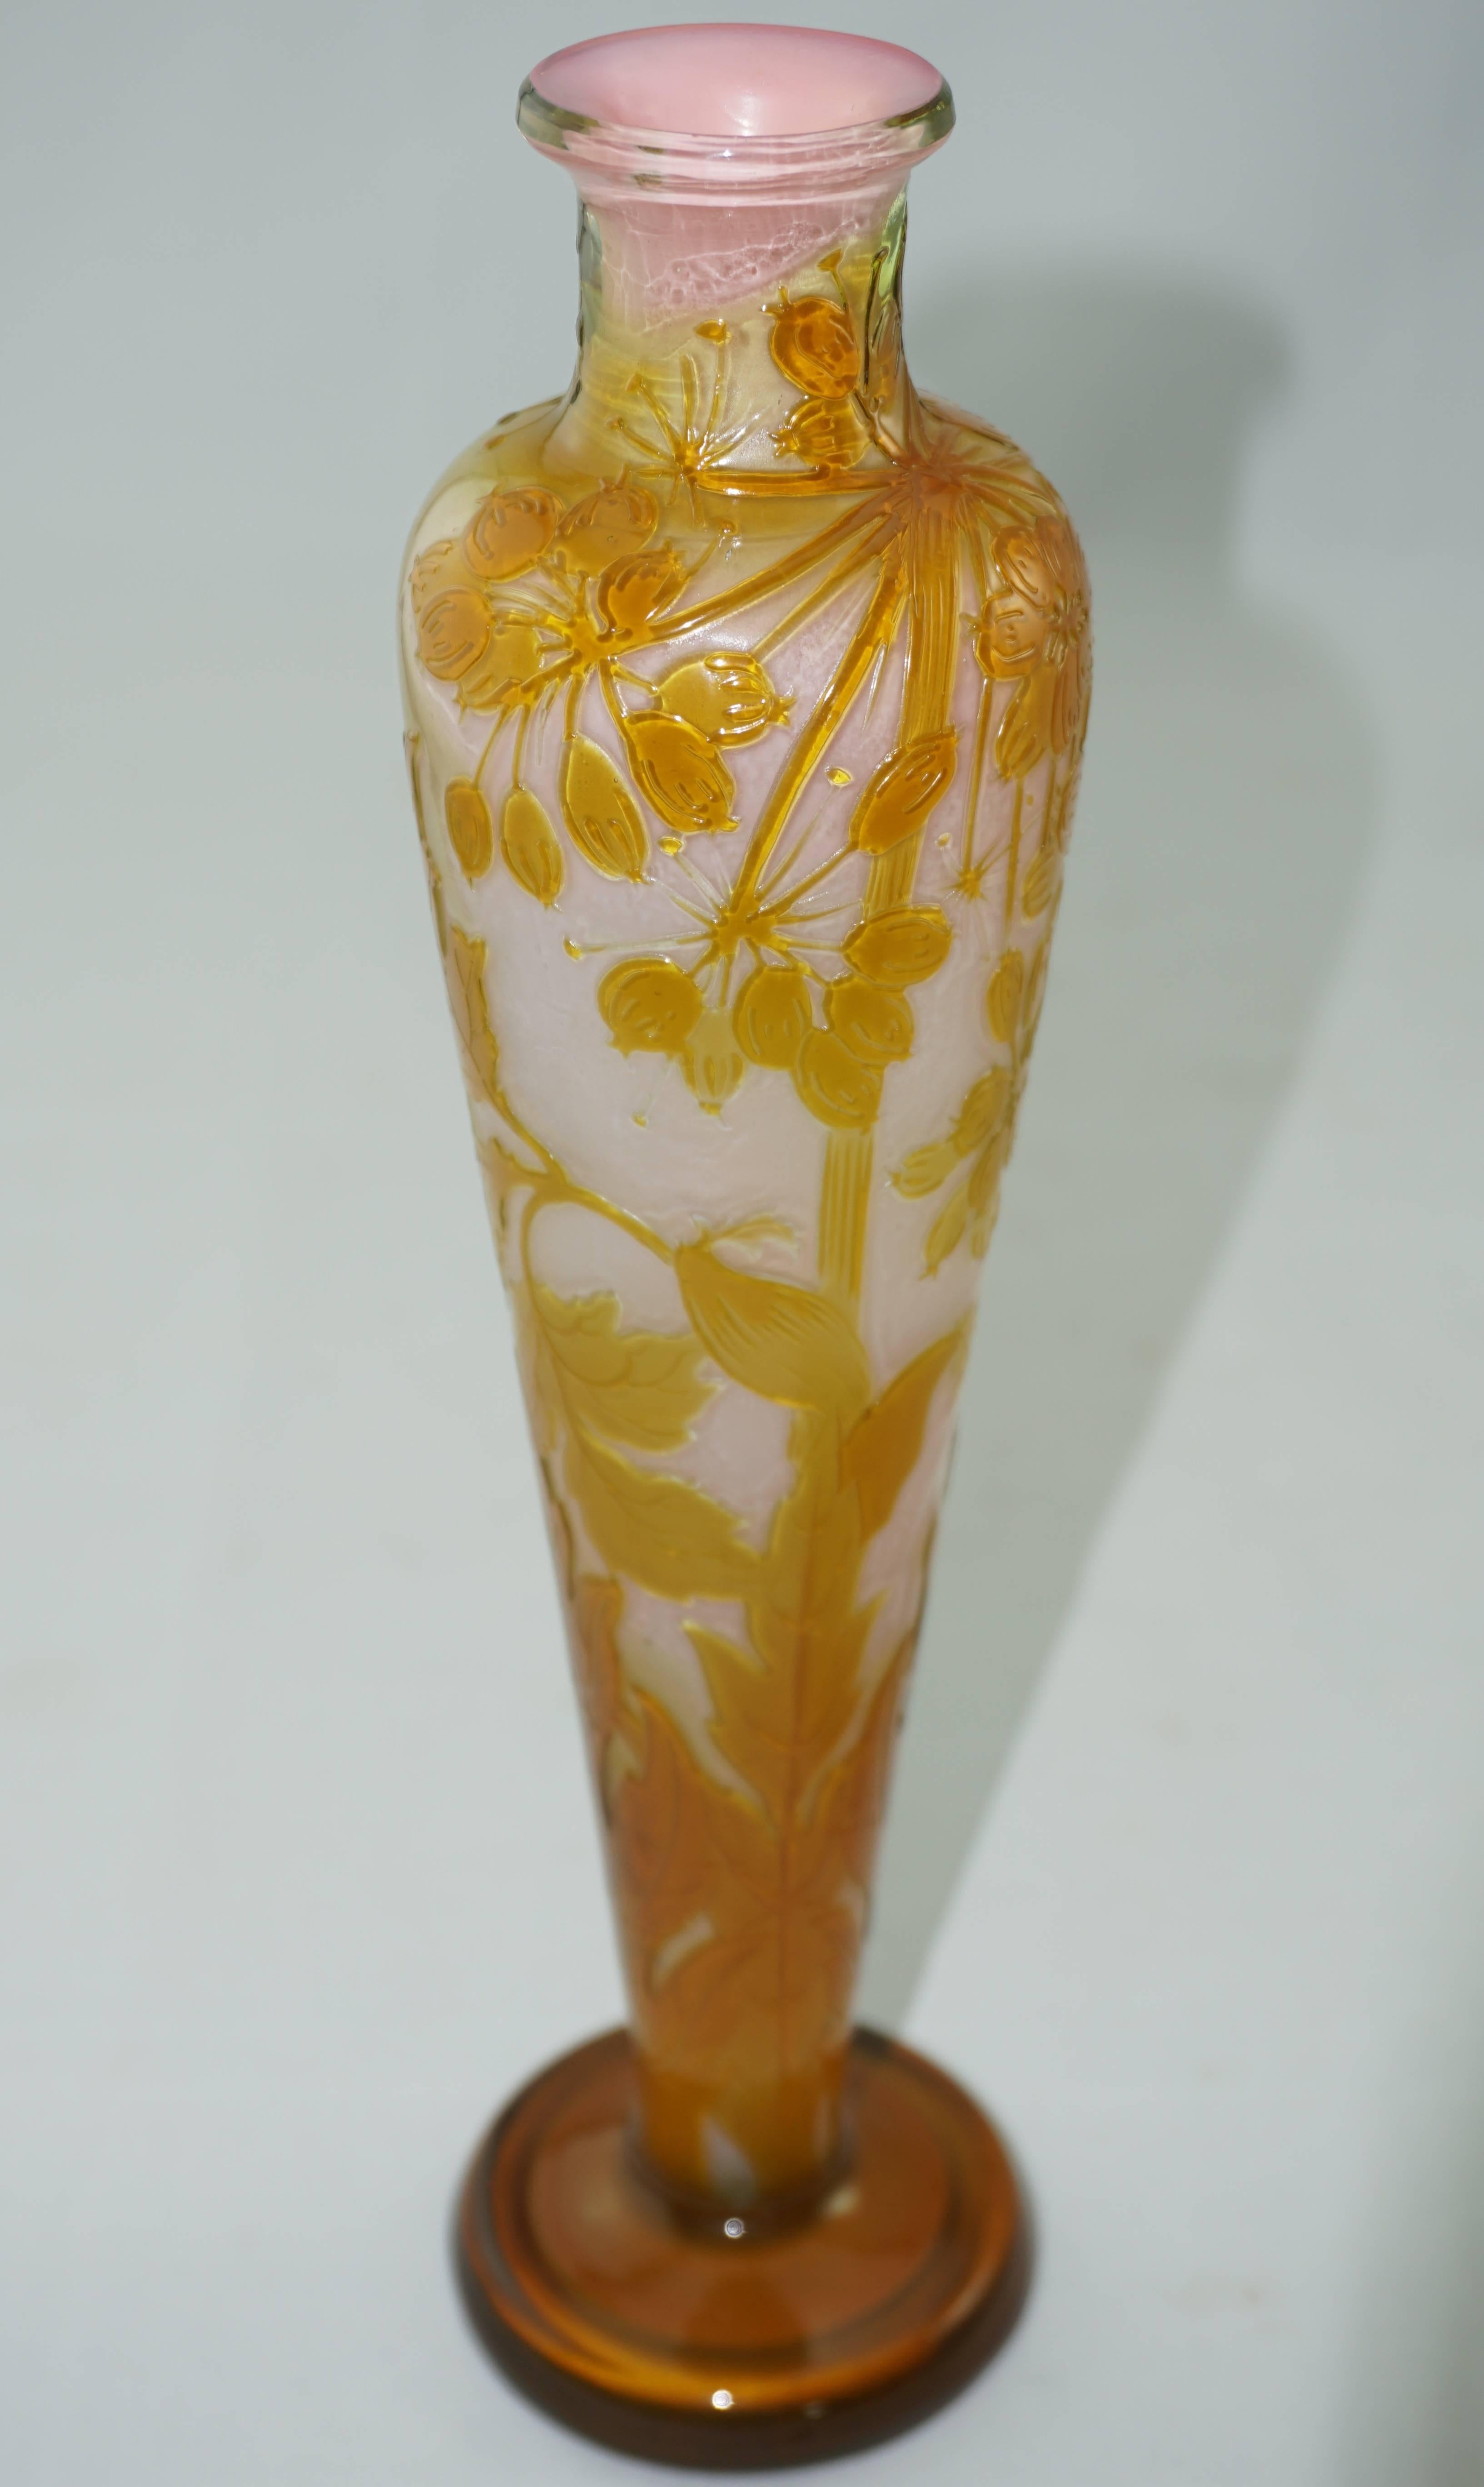 French Emile Galle Early Fire Polished Art Nouveau Cameo Vase